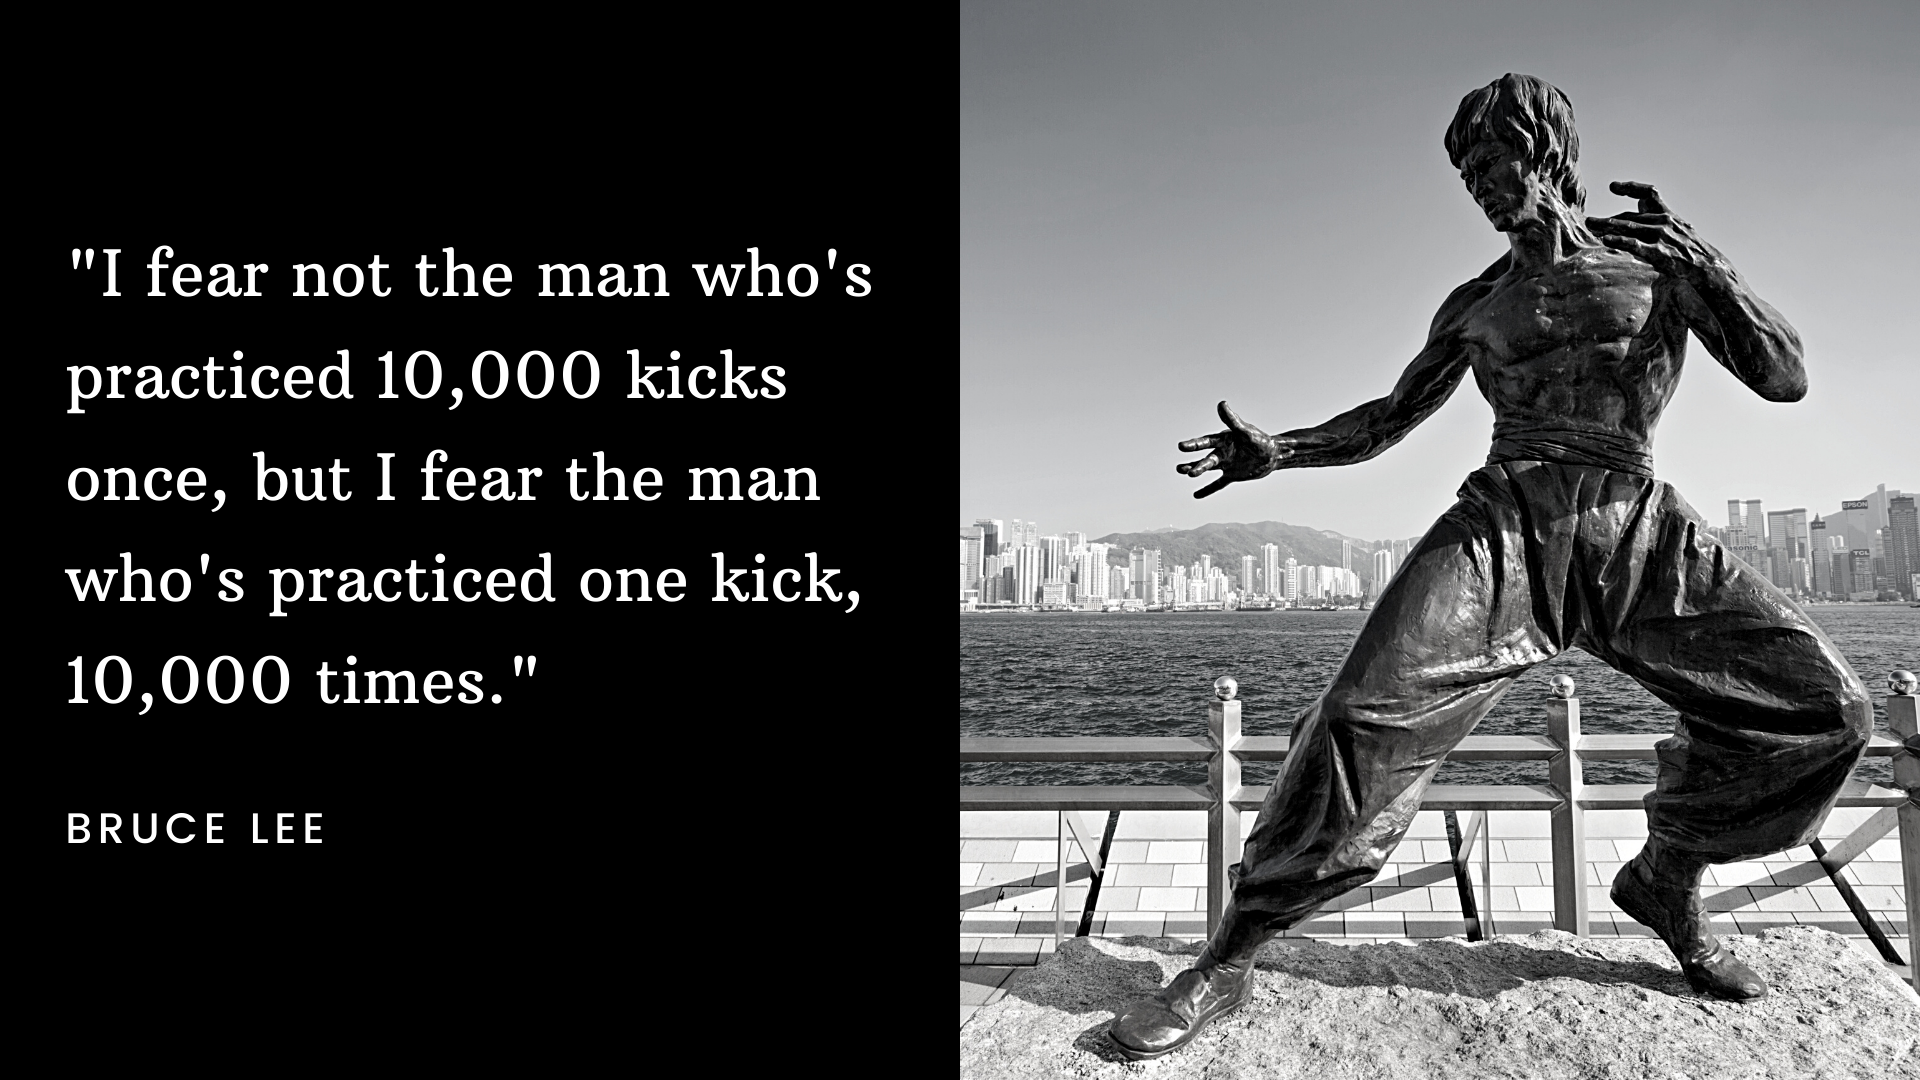 Bruce Lee and Sales Training